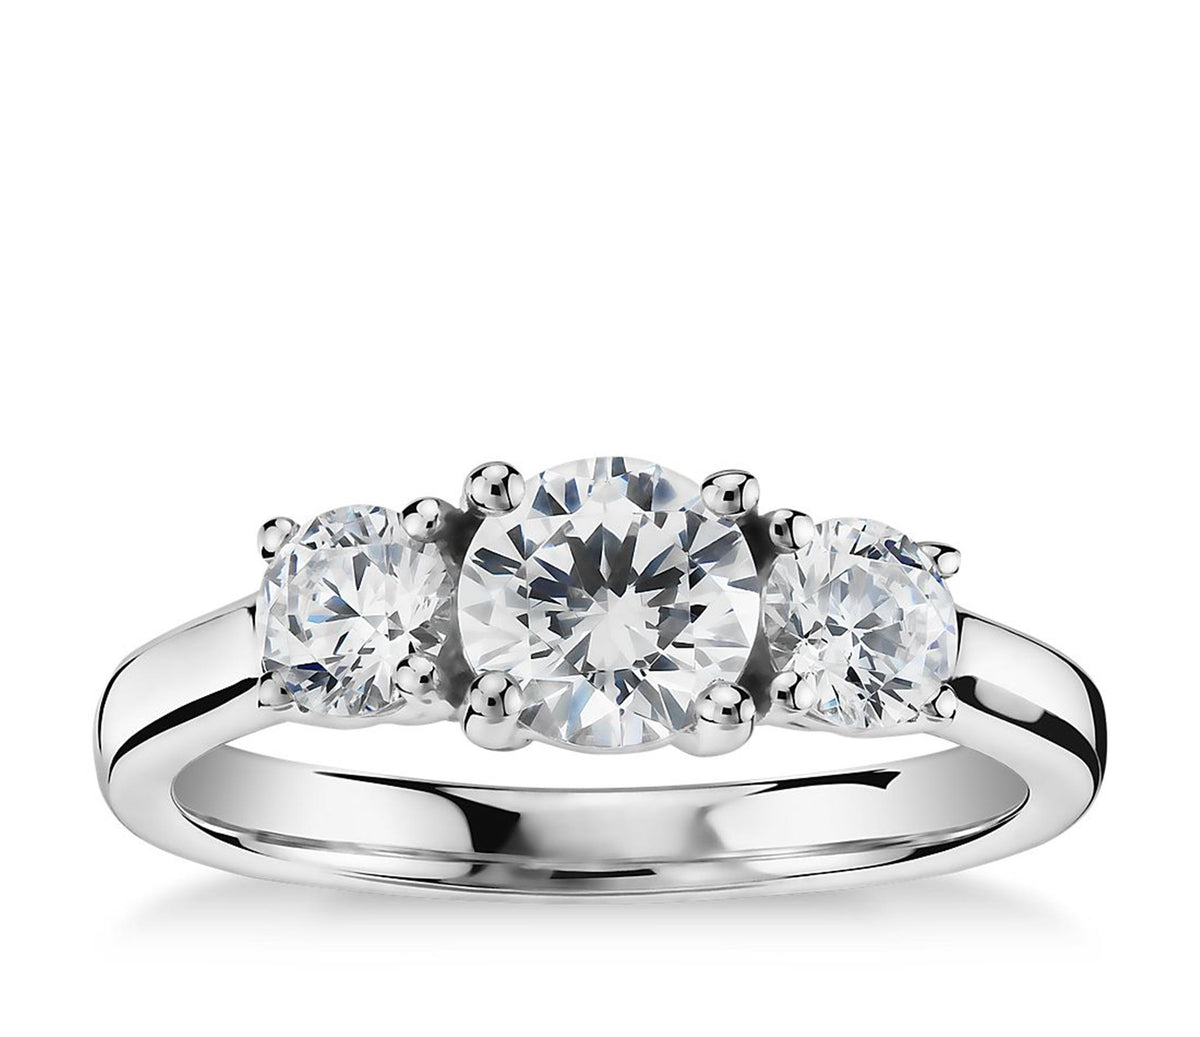 18Kt White Gold Three-Stone Ring With .46cttw Natural Diamonds